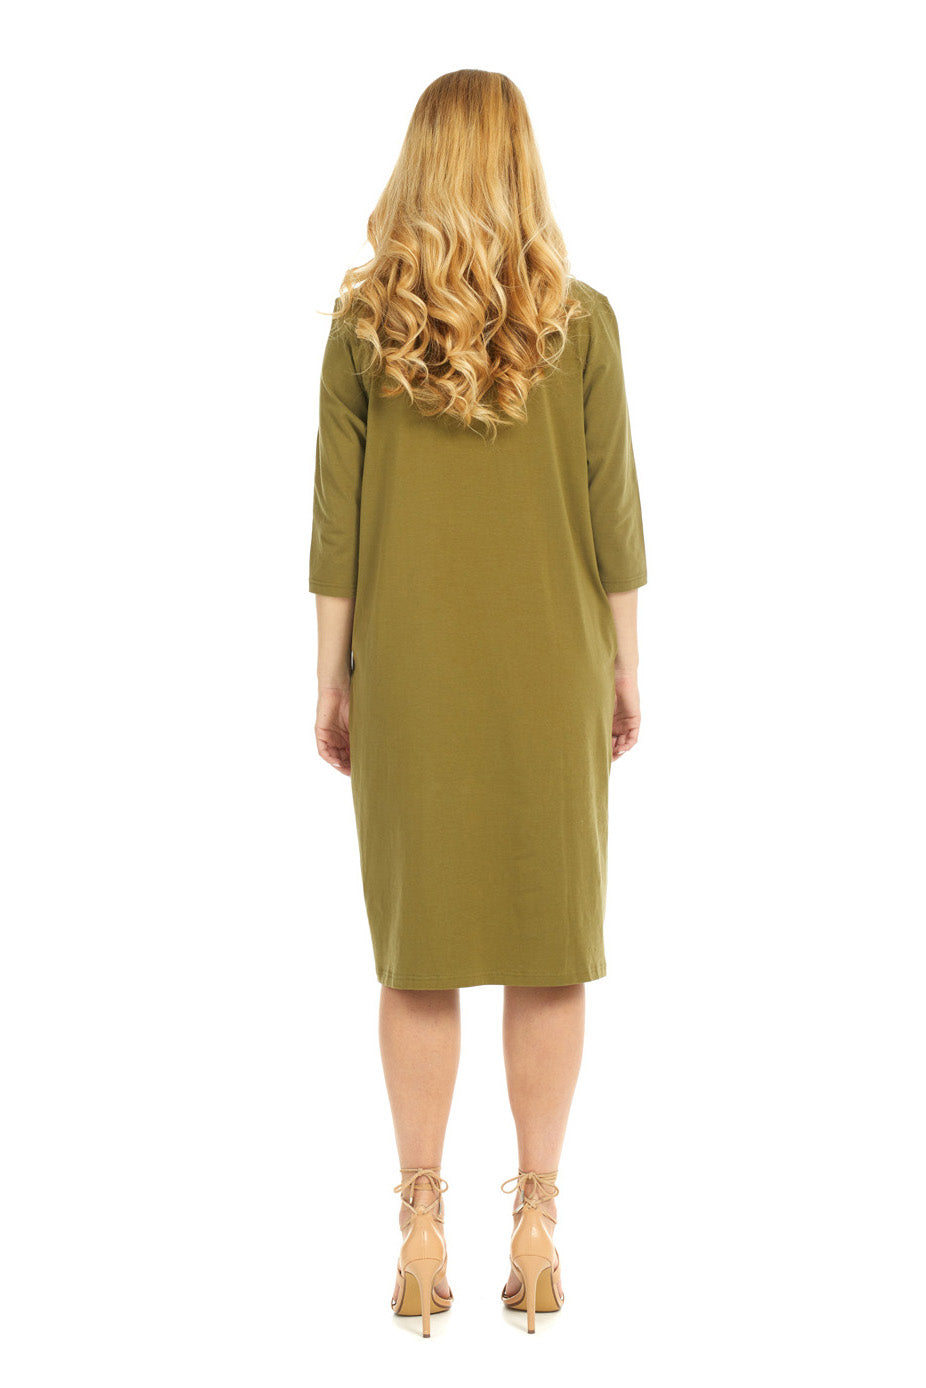 Soft cotton olive green plus size t-shirt dress with pockets. modest 3/4 sleeves and knee length